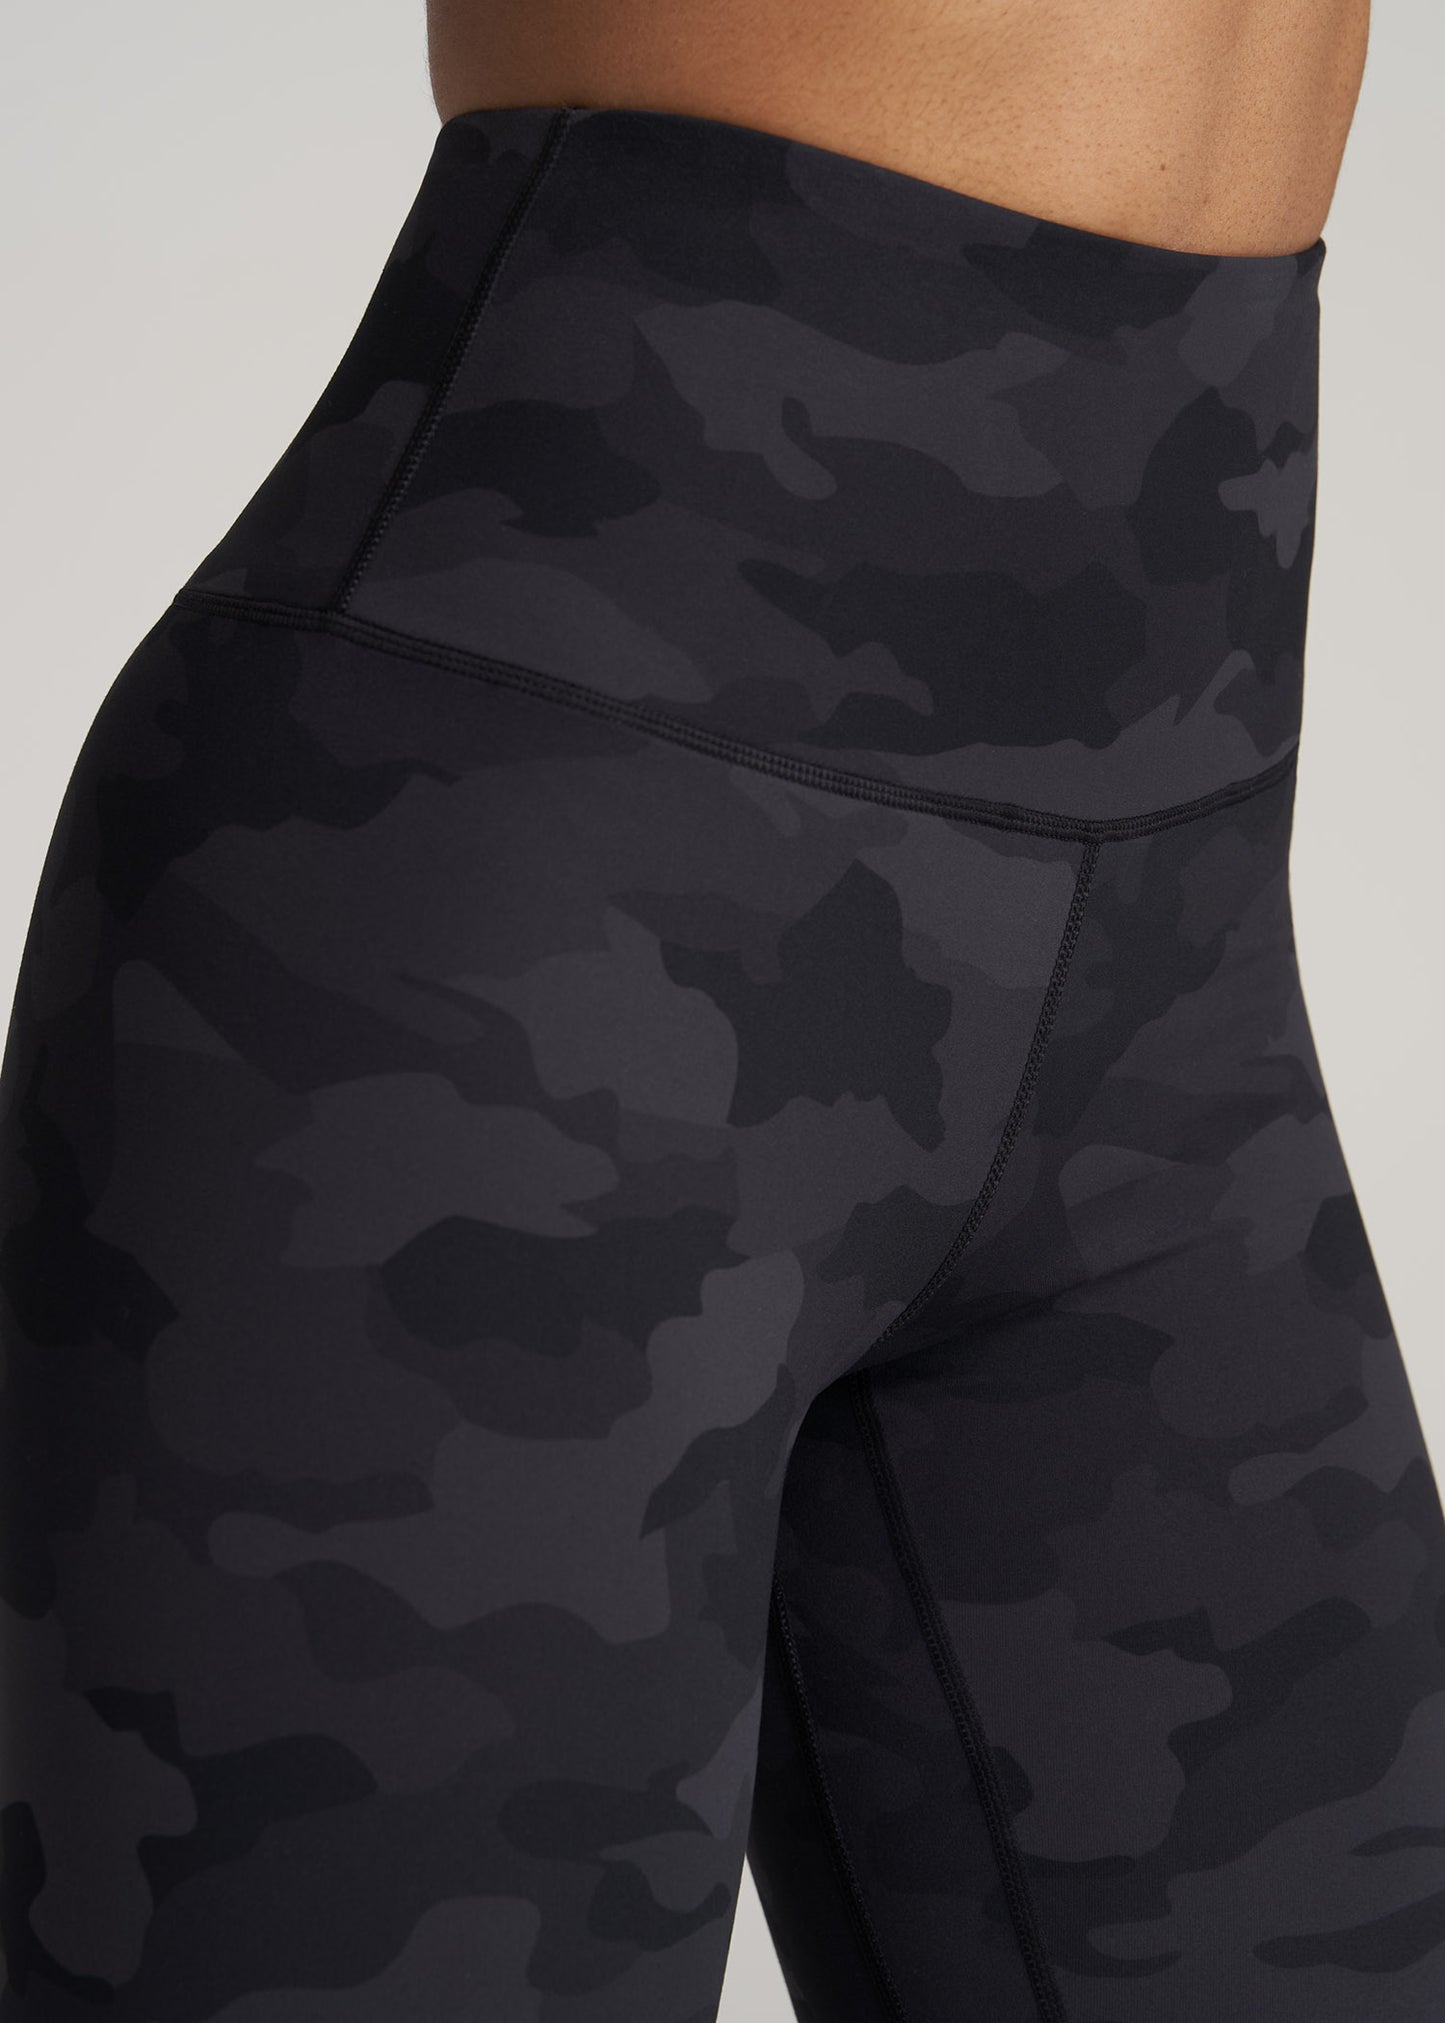 Grey Camo Plus Size High Rise Leggings - 1X at  Women's Clothing store